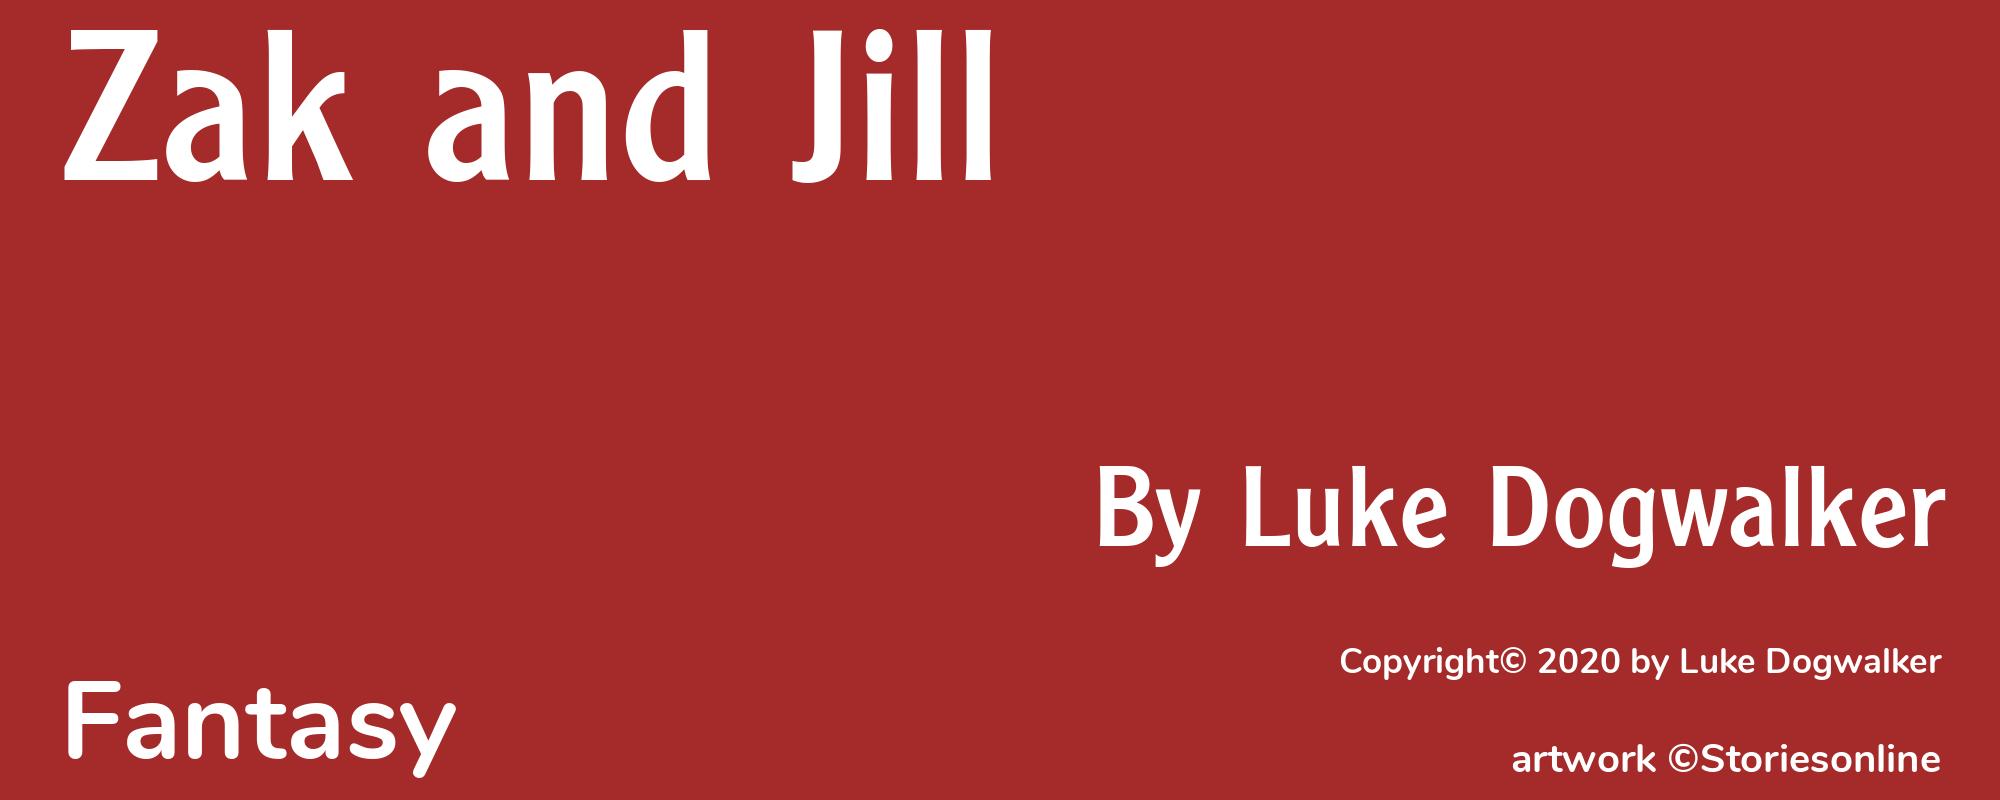 Zak and Jill - Cover